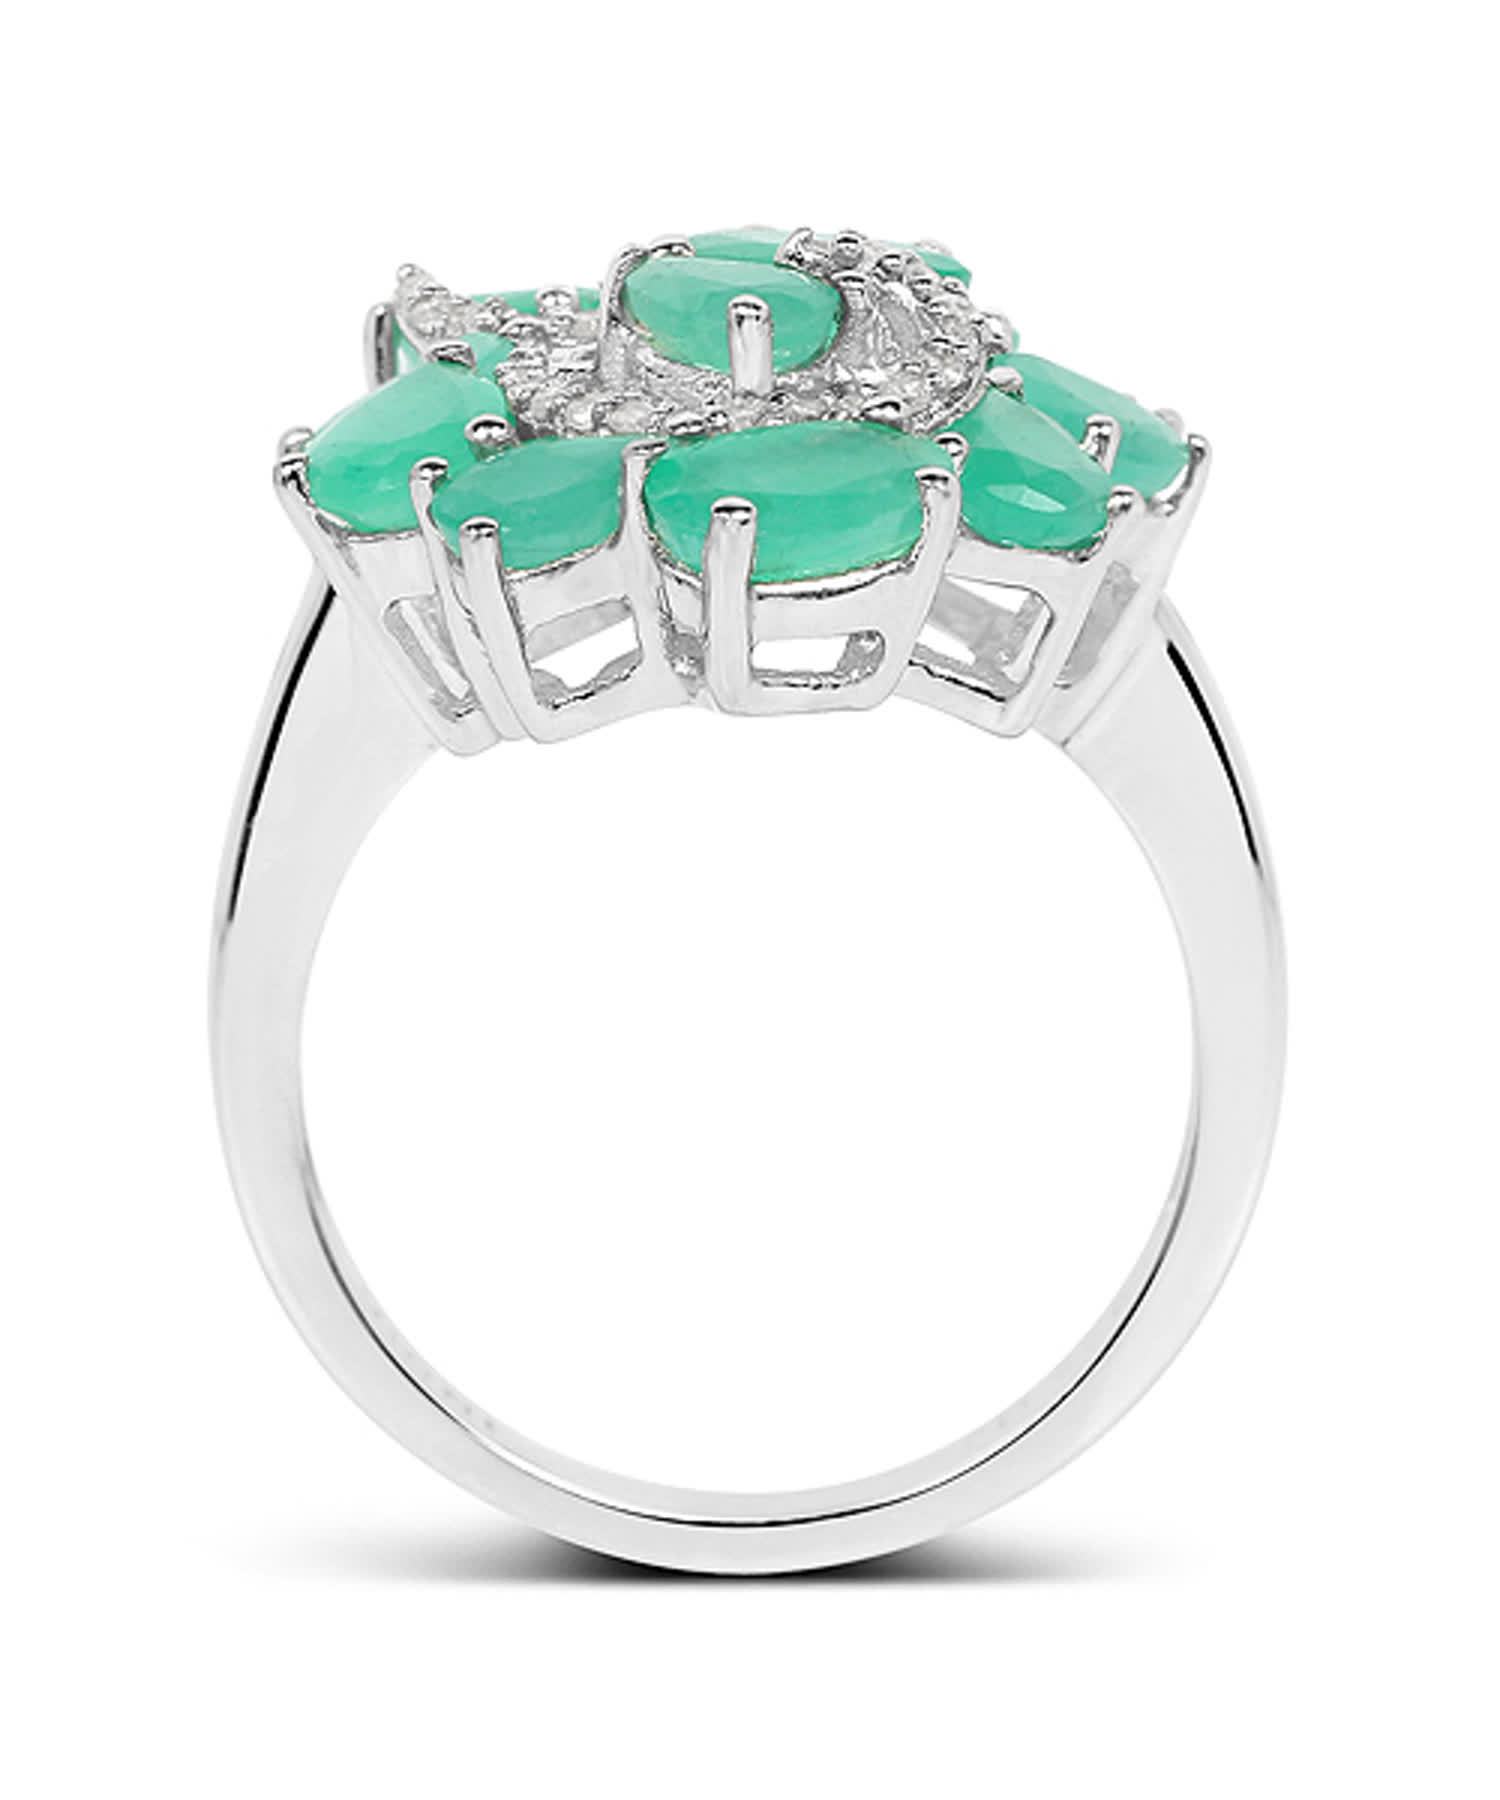 3.57ctw Natural Emerald and Diamond Rhodium Plated 925 Sterling Silver Cocktail Ring View 2